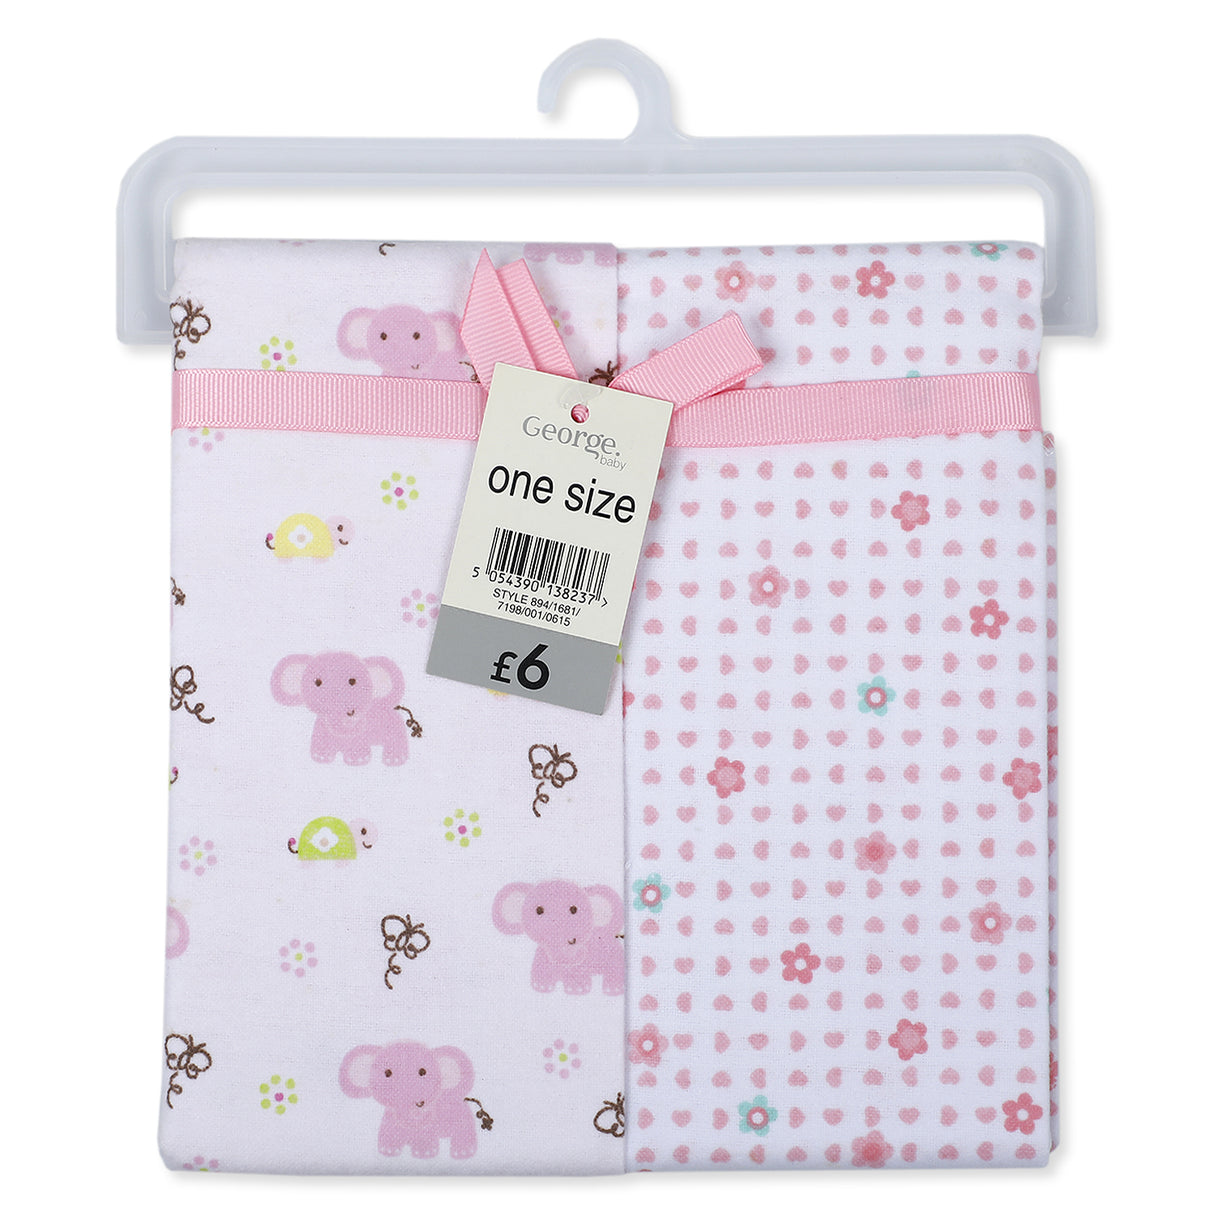 Soft And Cozy Premium Pack Of 2 Cotton Wrapper